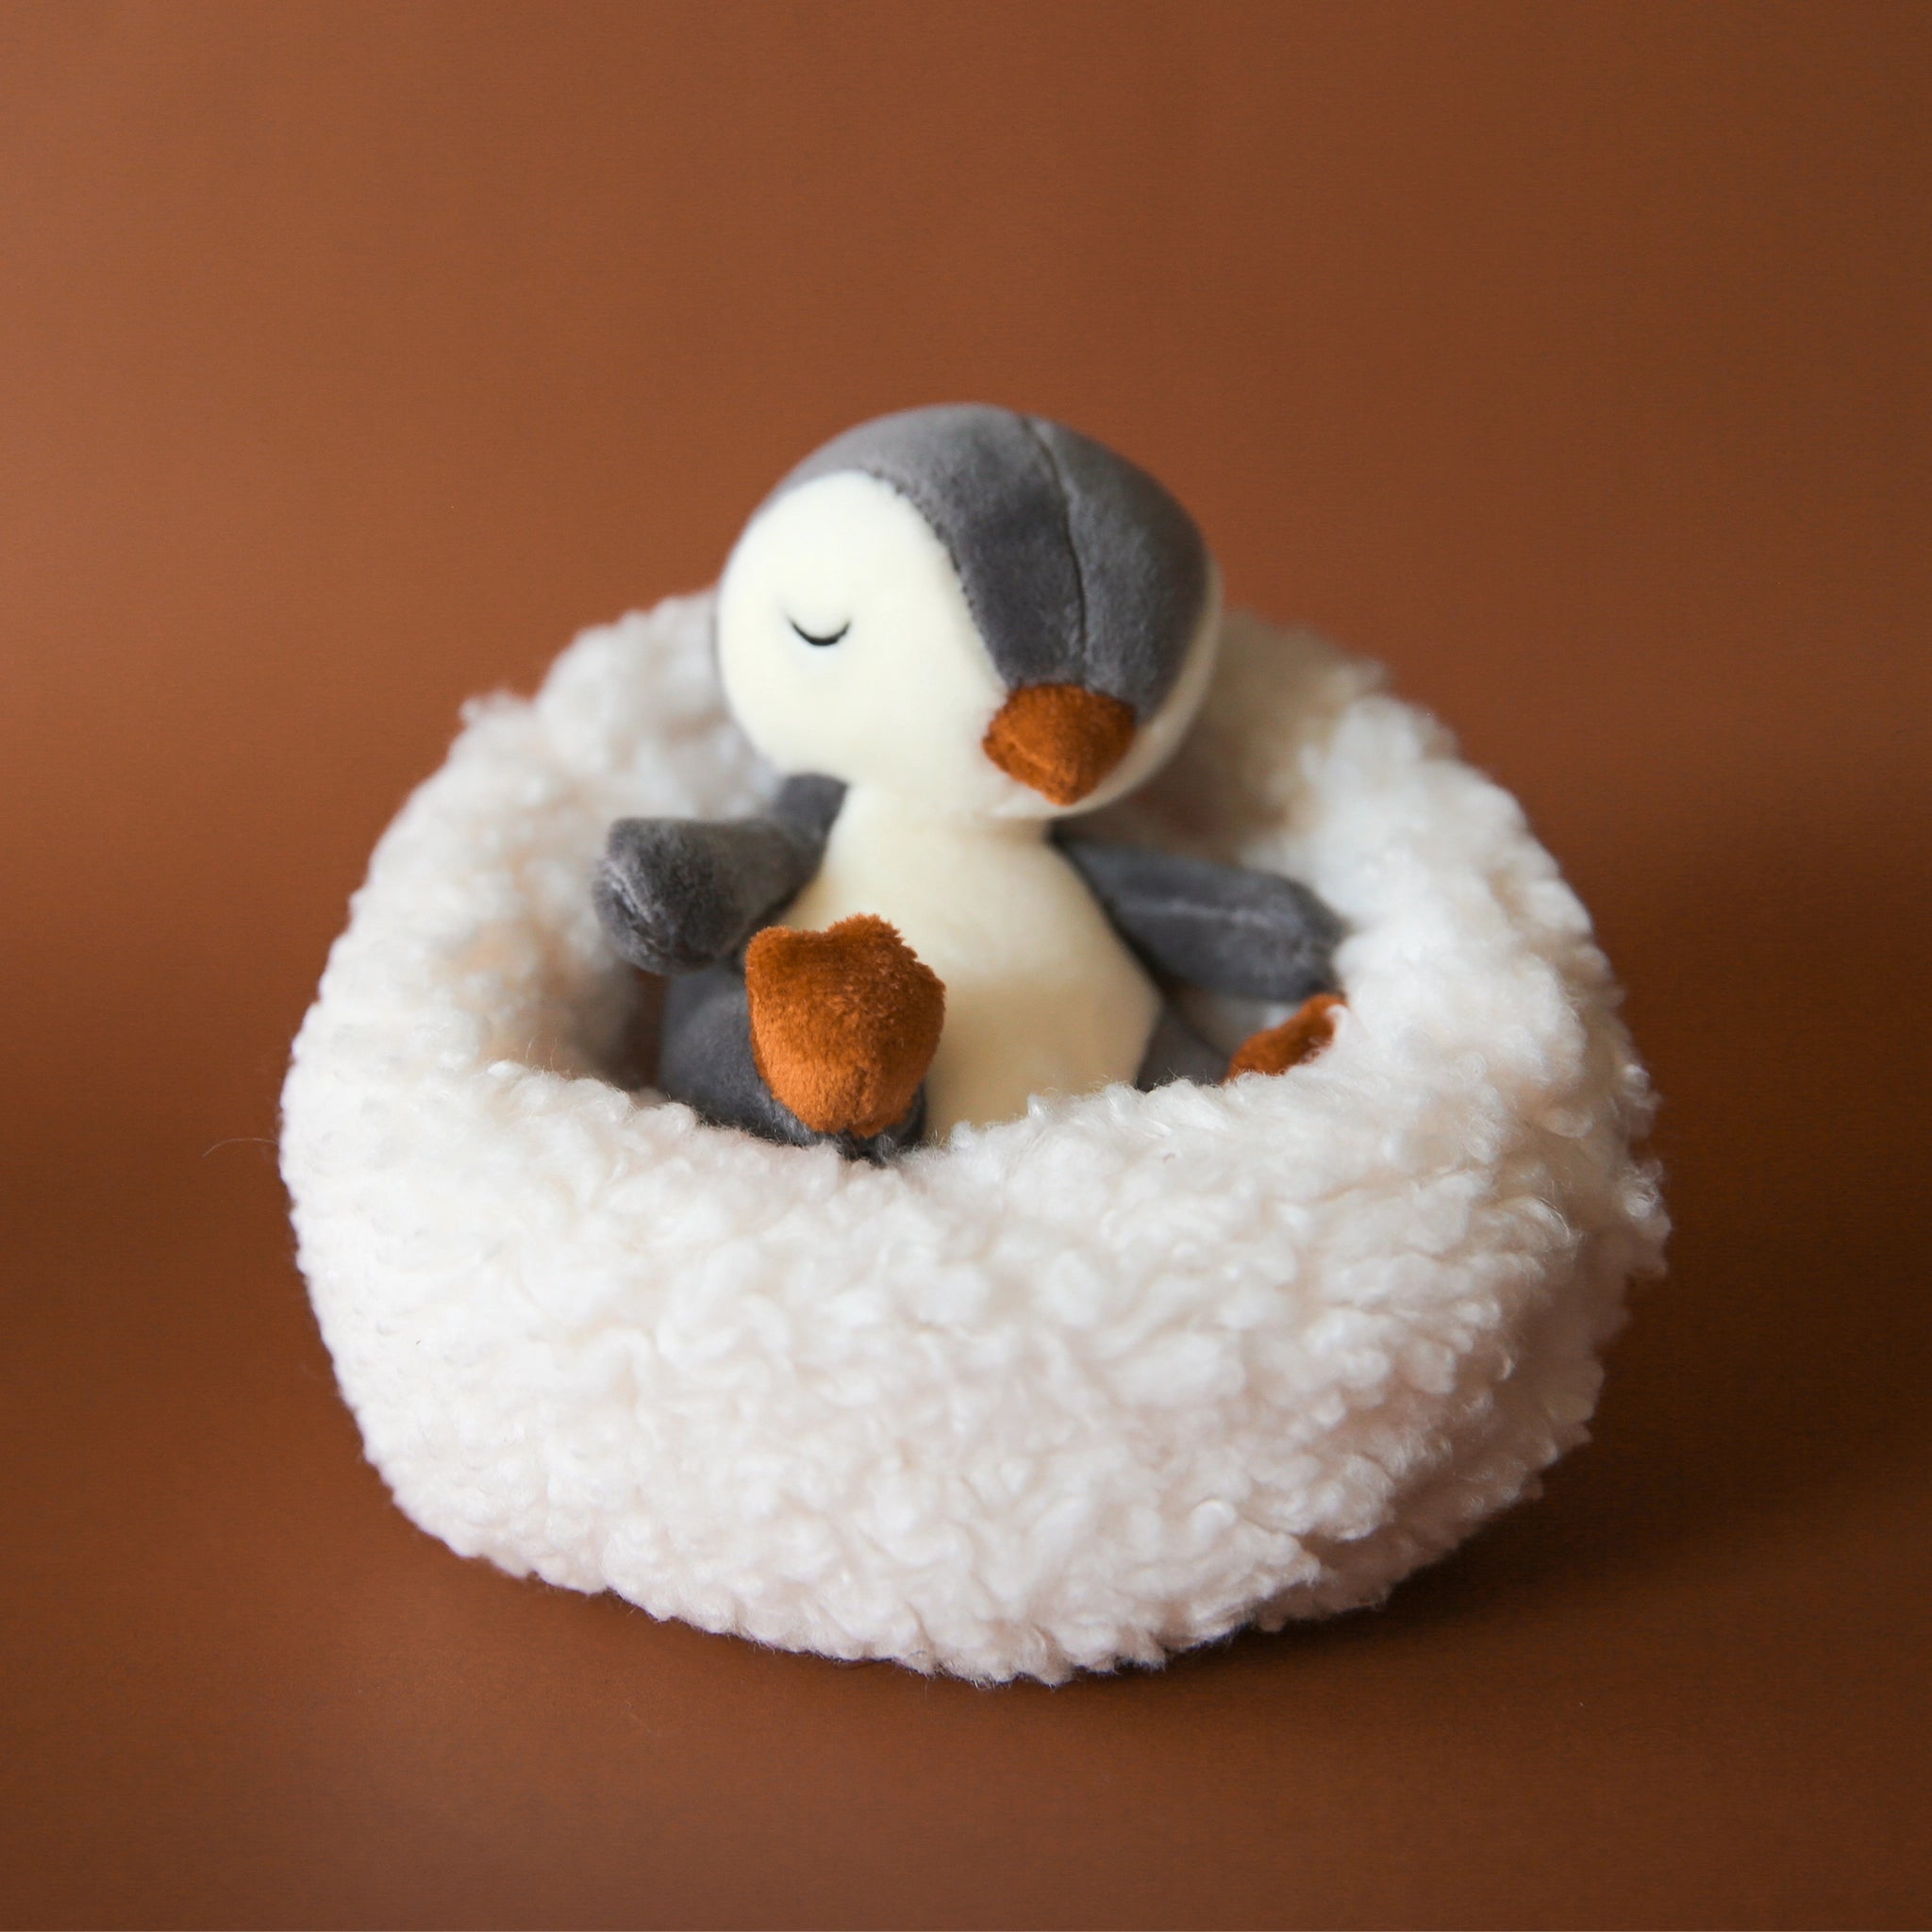 On a brown background is a penguin stuffed animal with a white boucle bed.